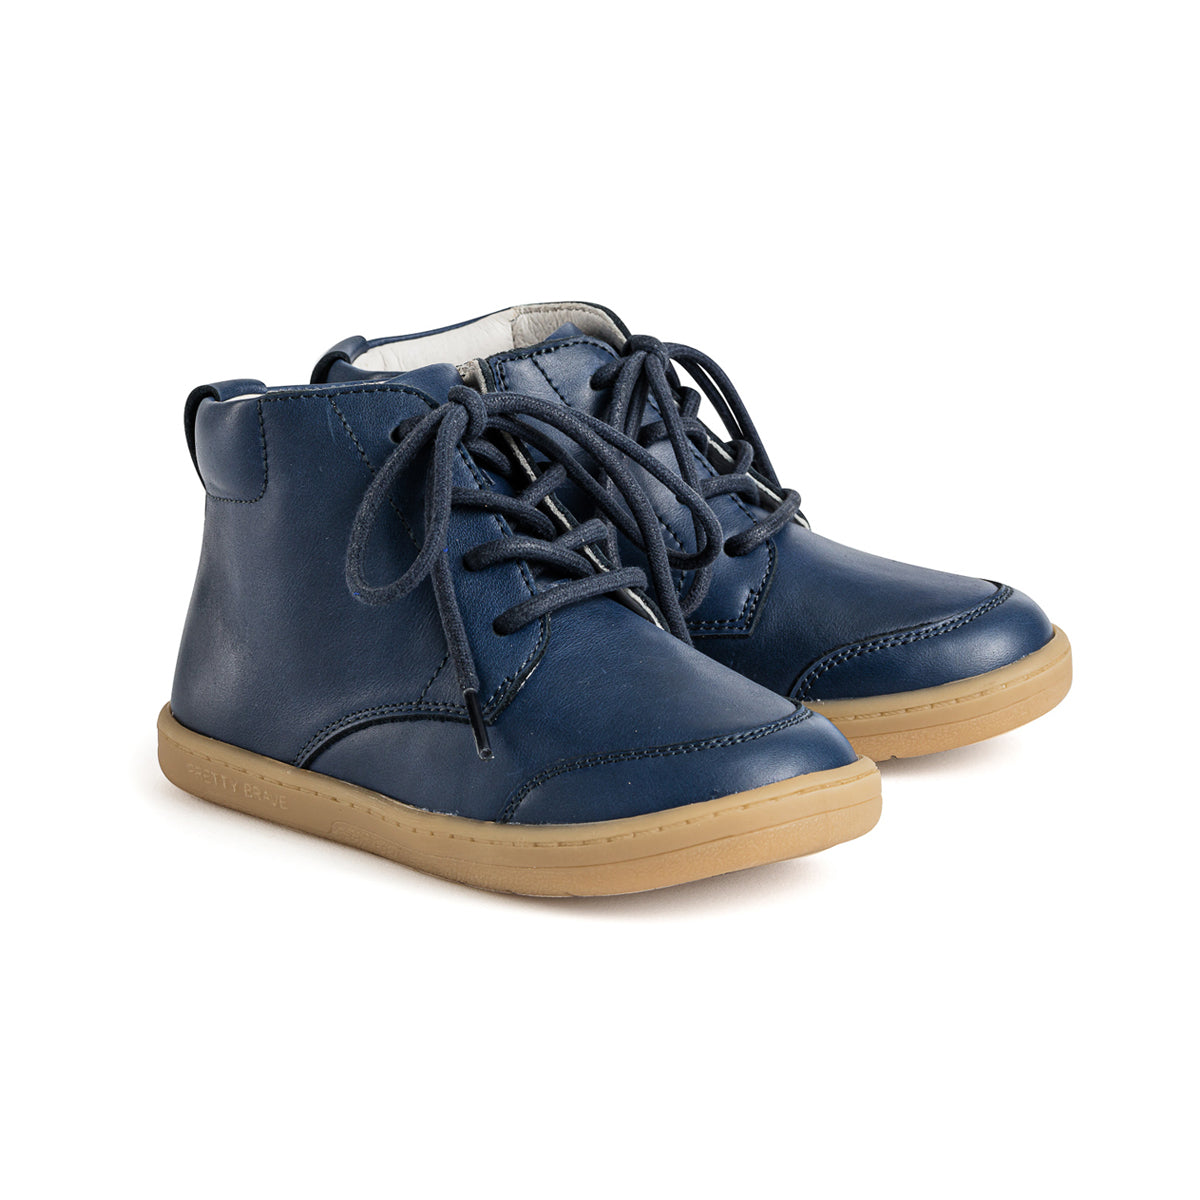 Pair of Archie boot in midnight blue colour